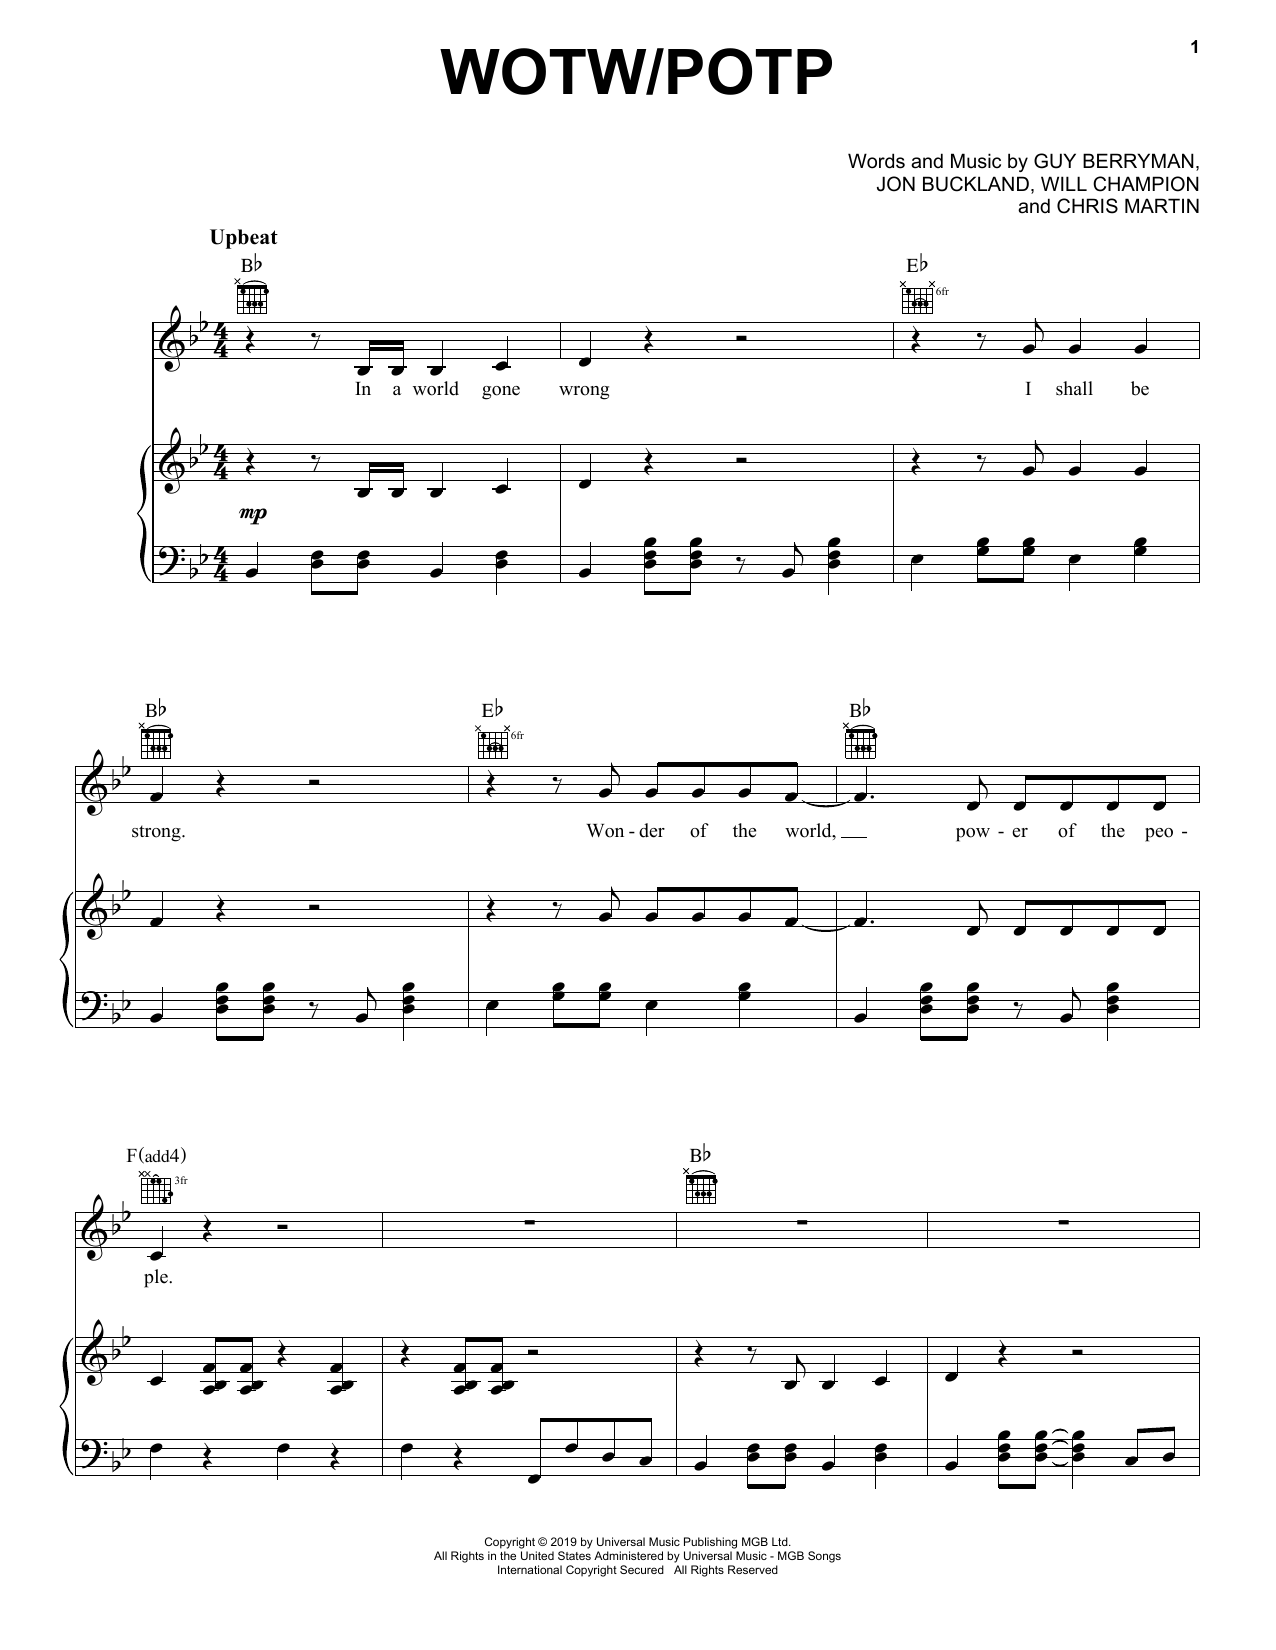 Download Coldplay WOTW / POTP Sheet Music